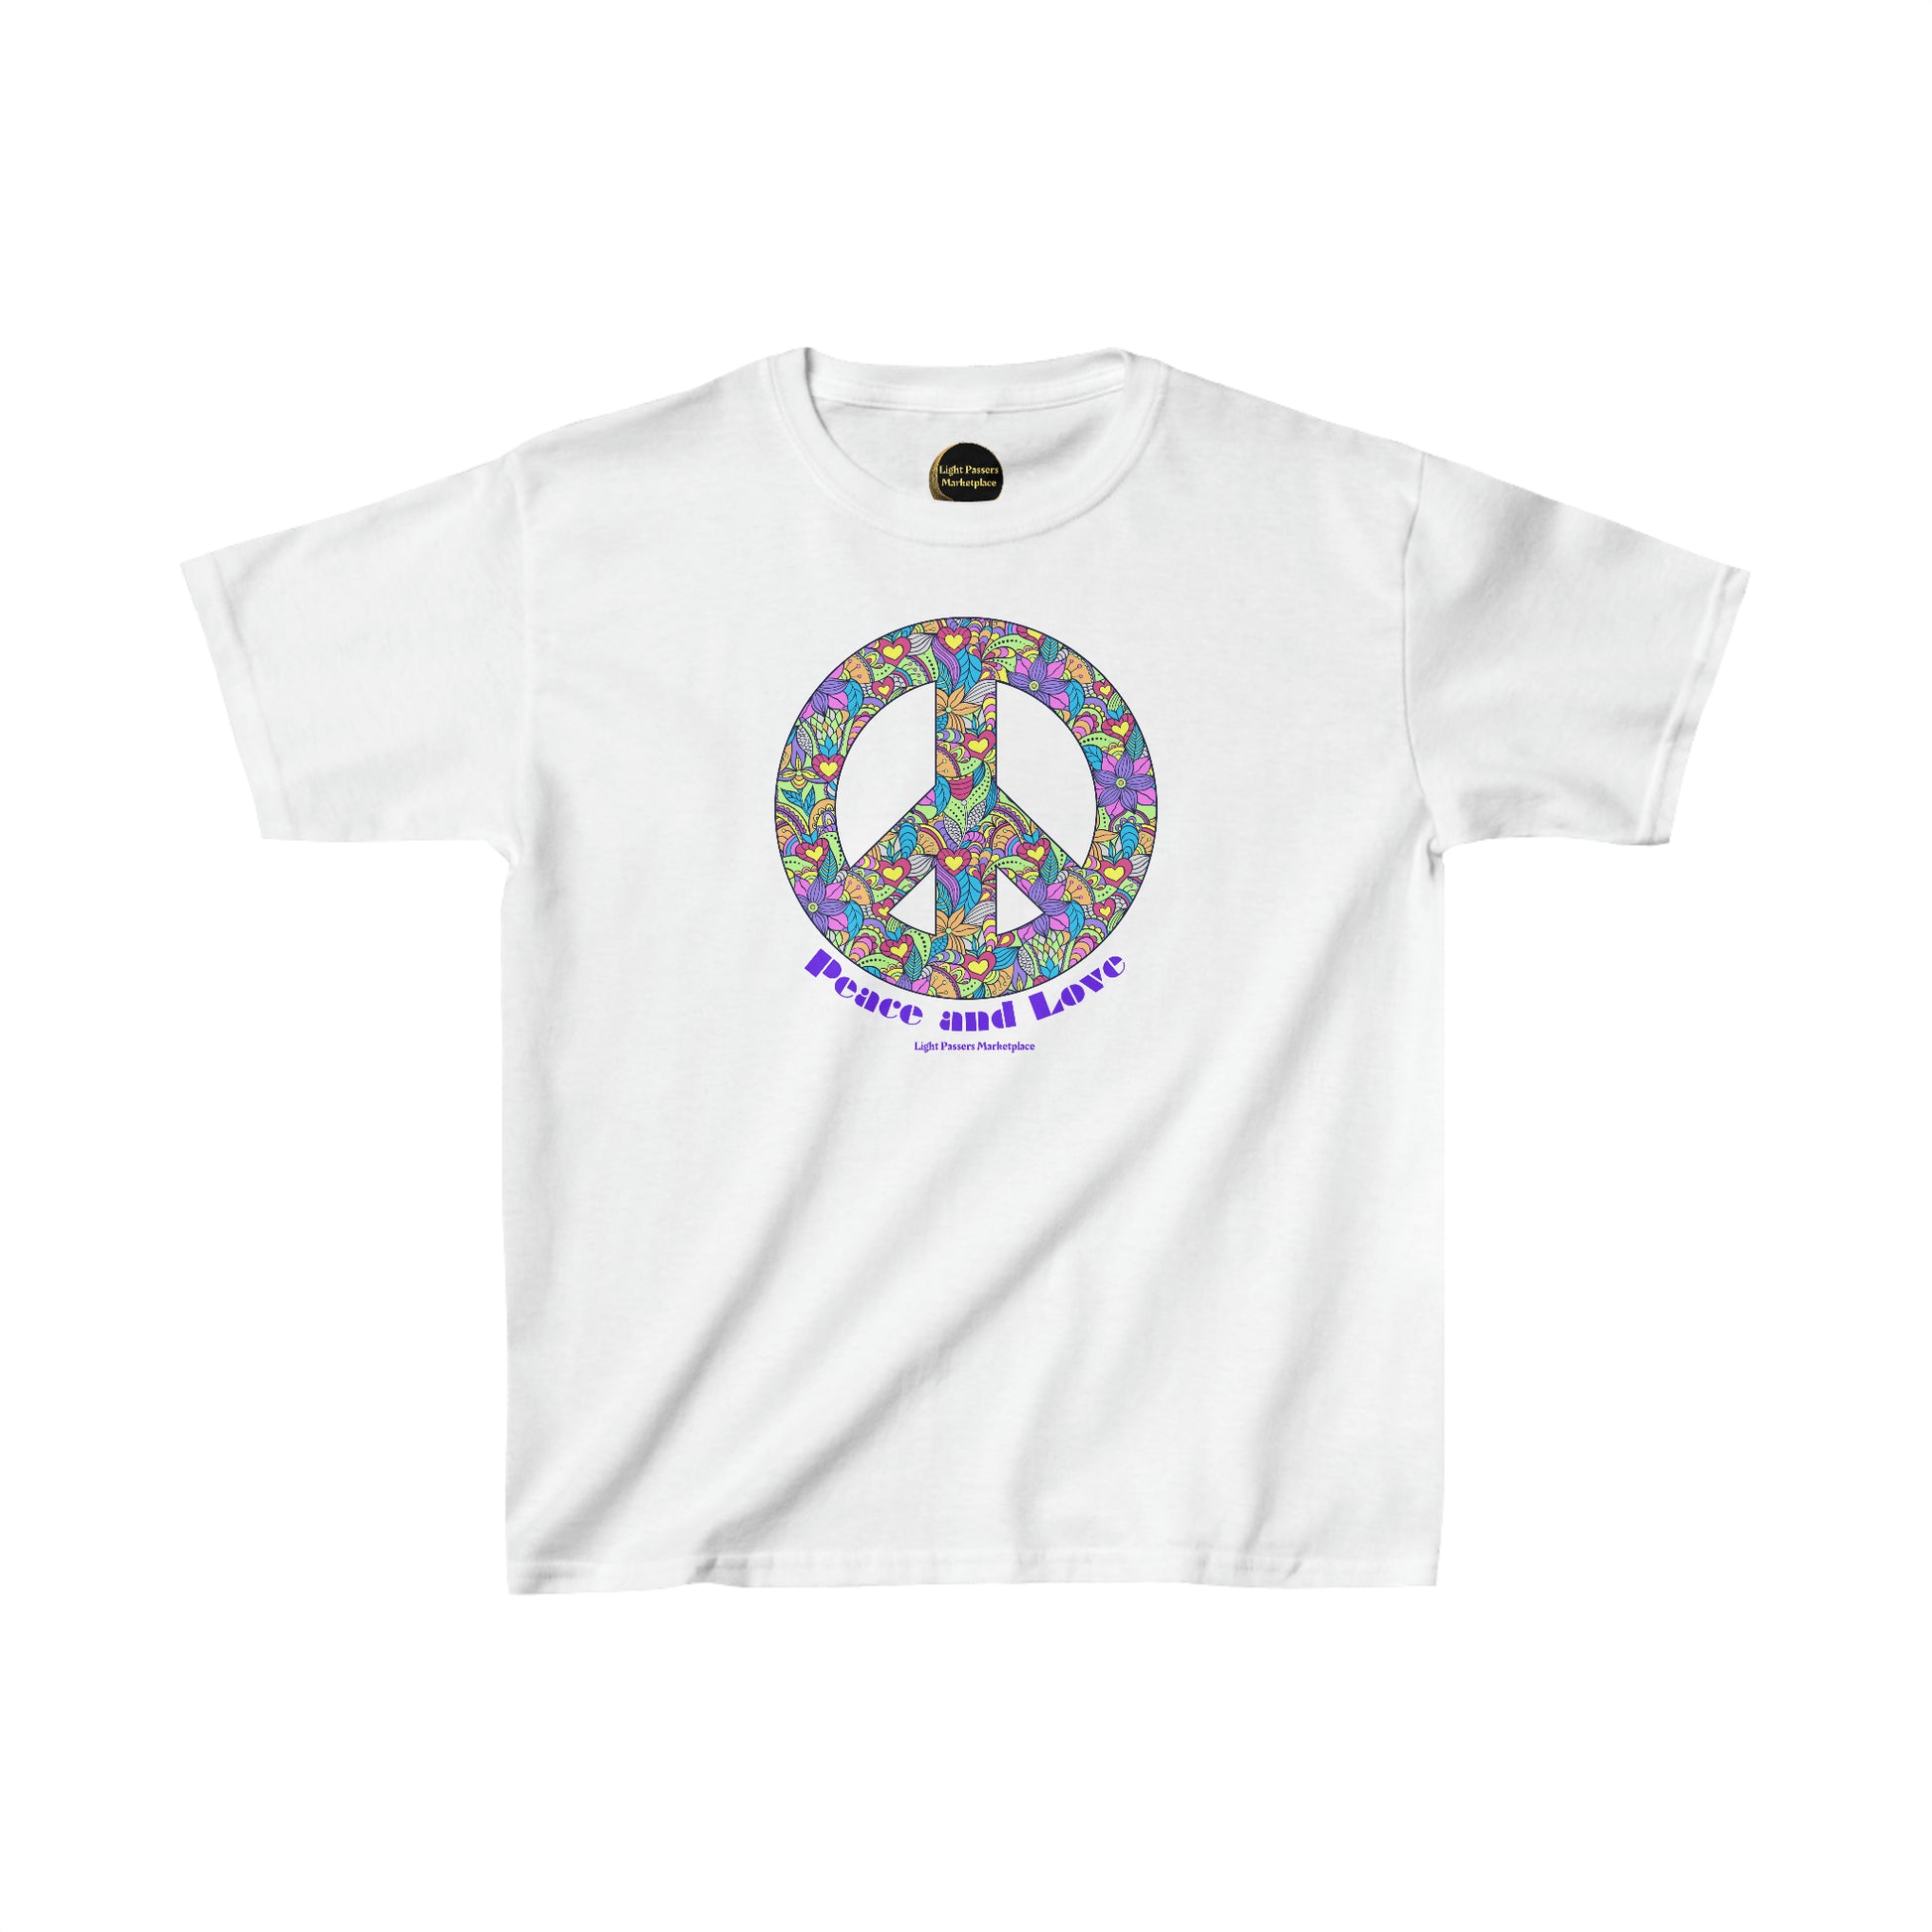 A white youth t-shirt featuring a peace sign adorned with colorful flowers, made of 100% cotton with twill tape shoulders for durability, and a curl-resistant ribbed collar.